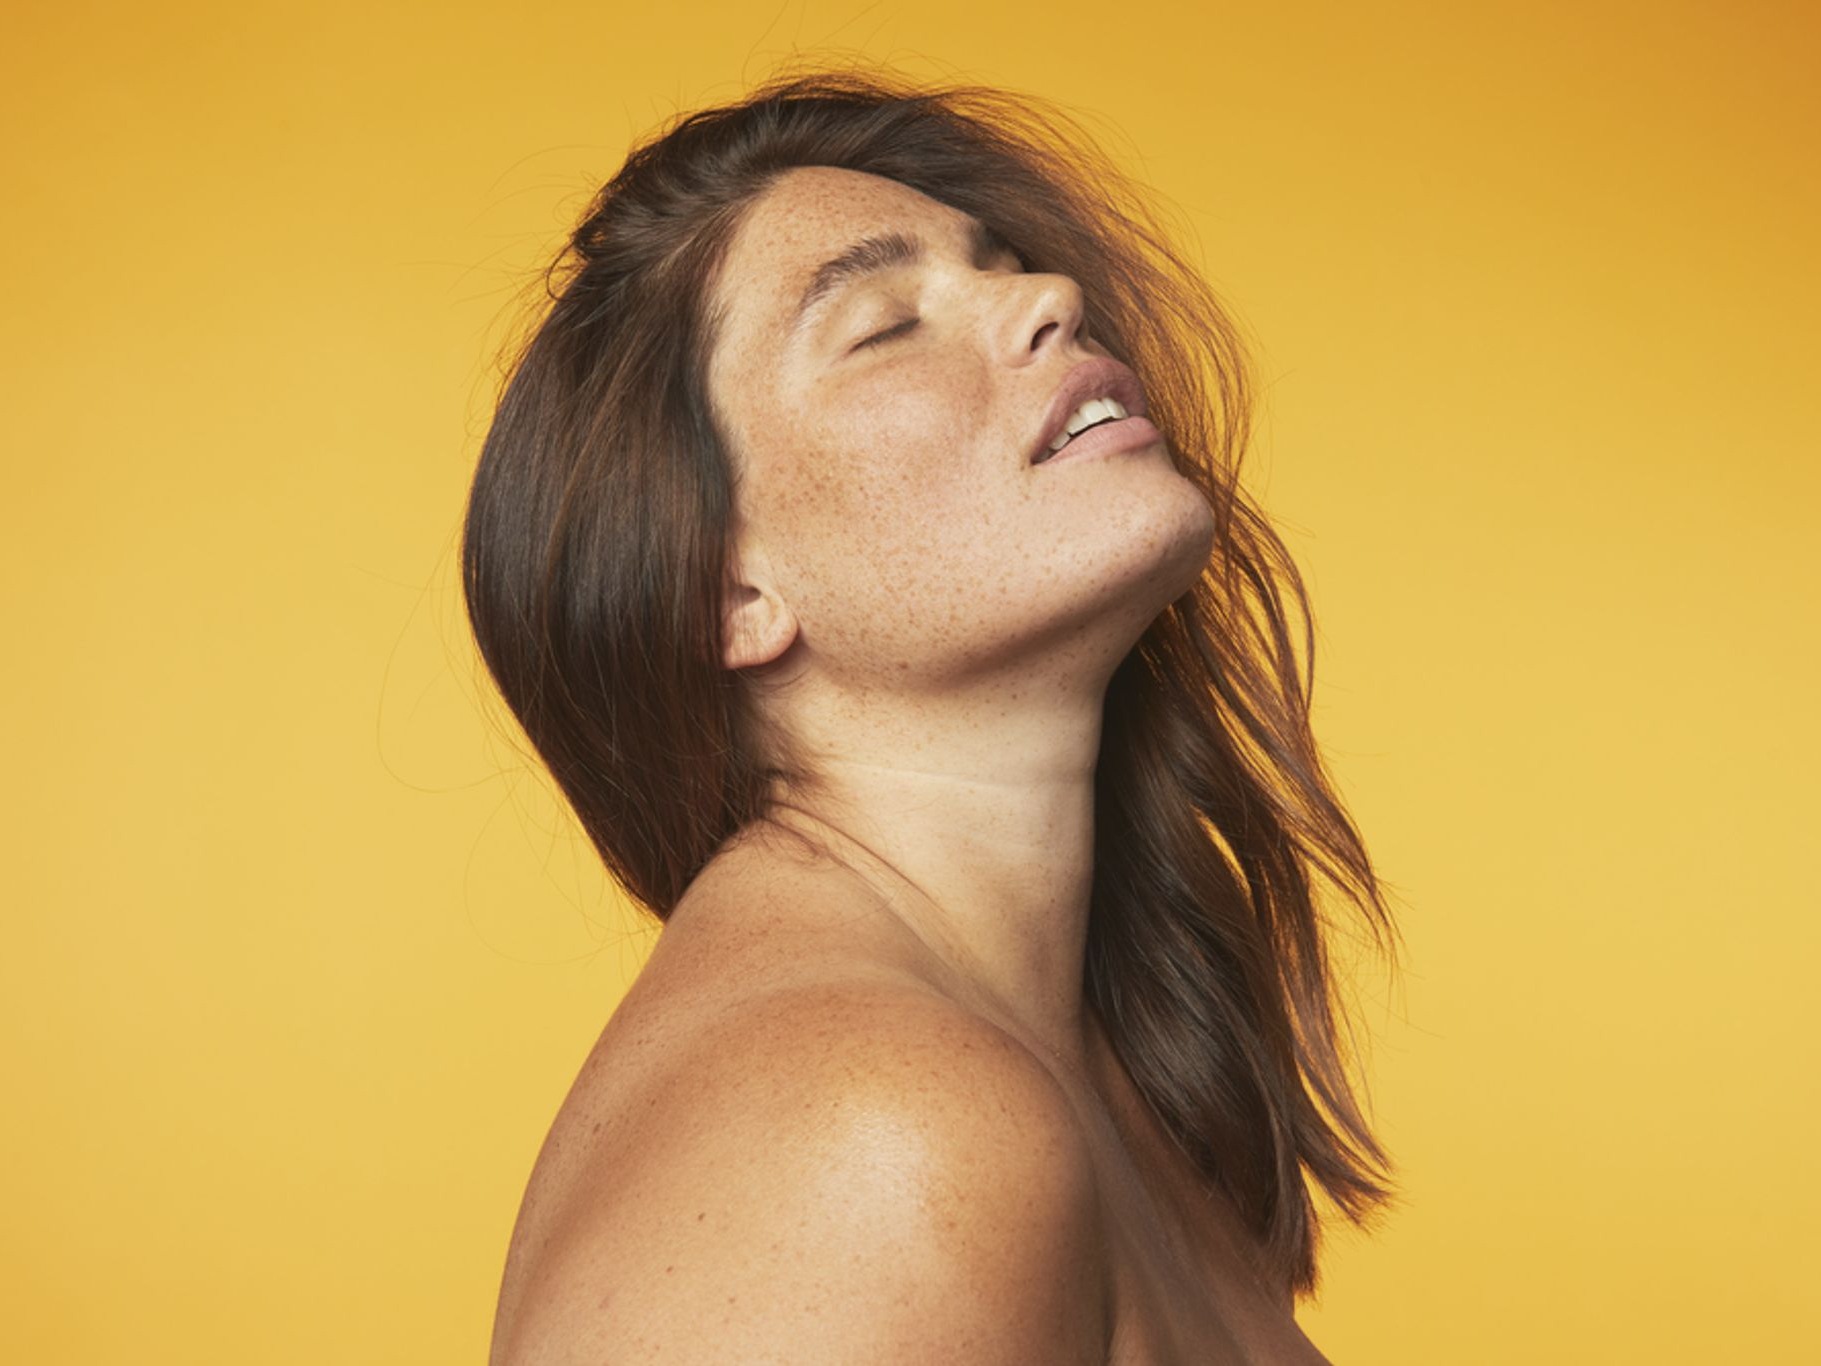 Woman with eyes closed against yellow background